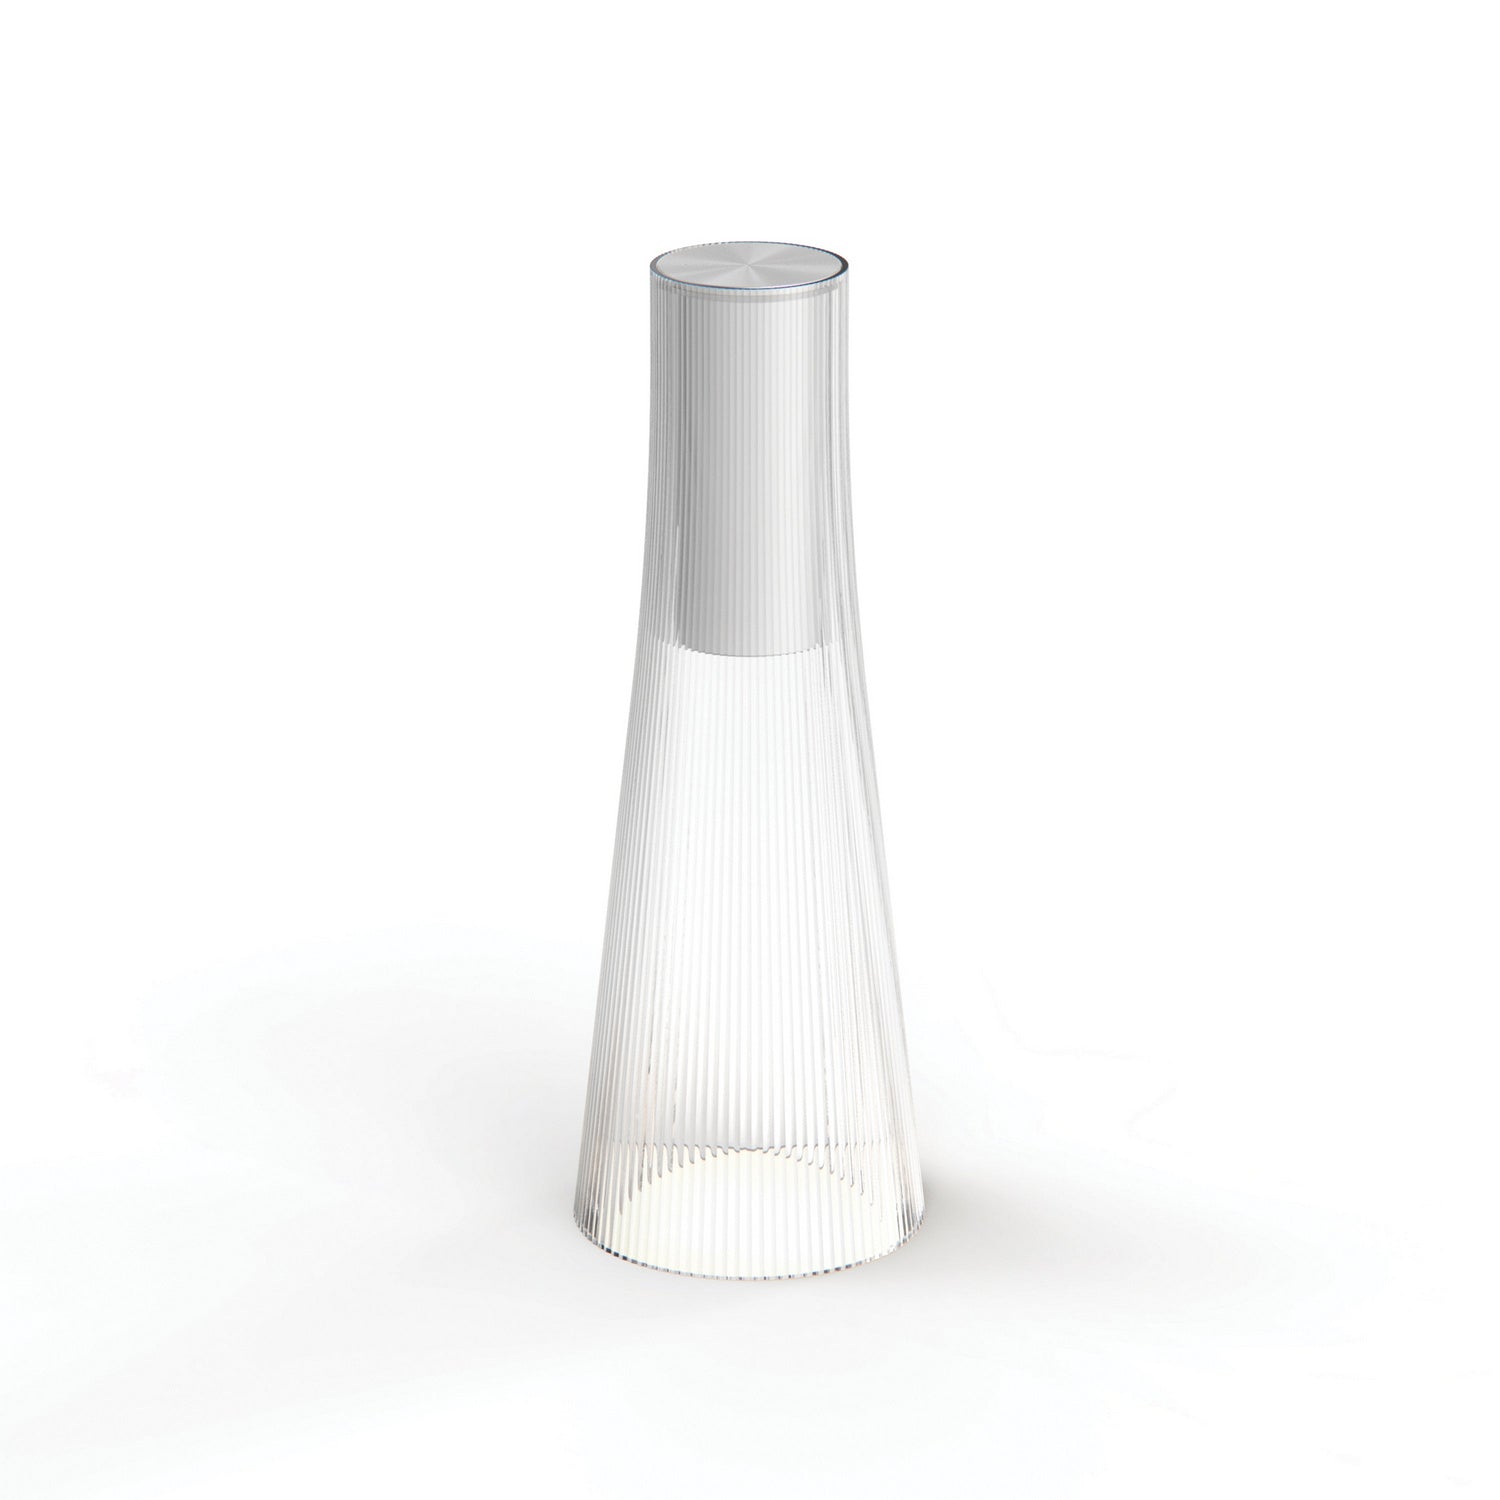 Pablo Designs - LED Table Lamp - Candel - Clear/Silver- Union Lighting Luminaires Decor